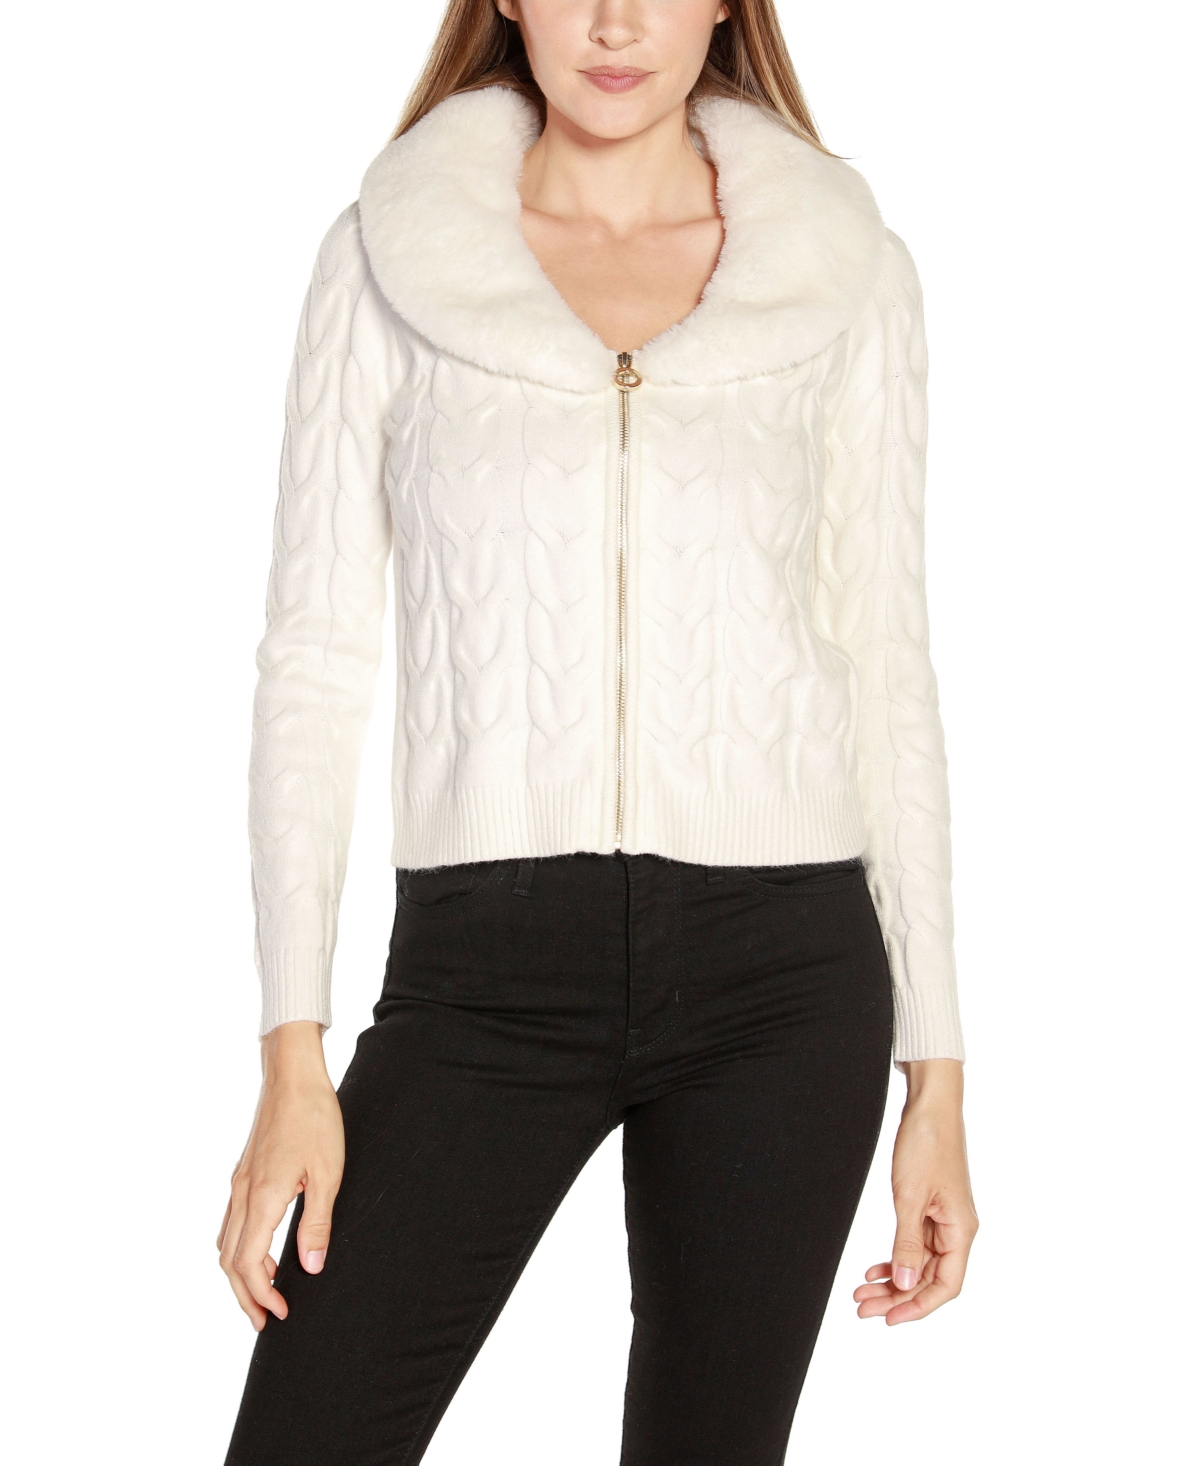 Black Label Women's Faux Fur Collared Cable Cardigan Sweater - Winter White